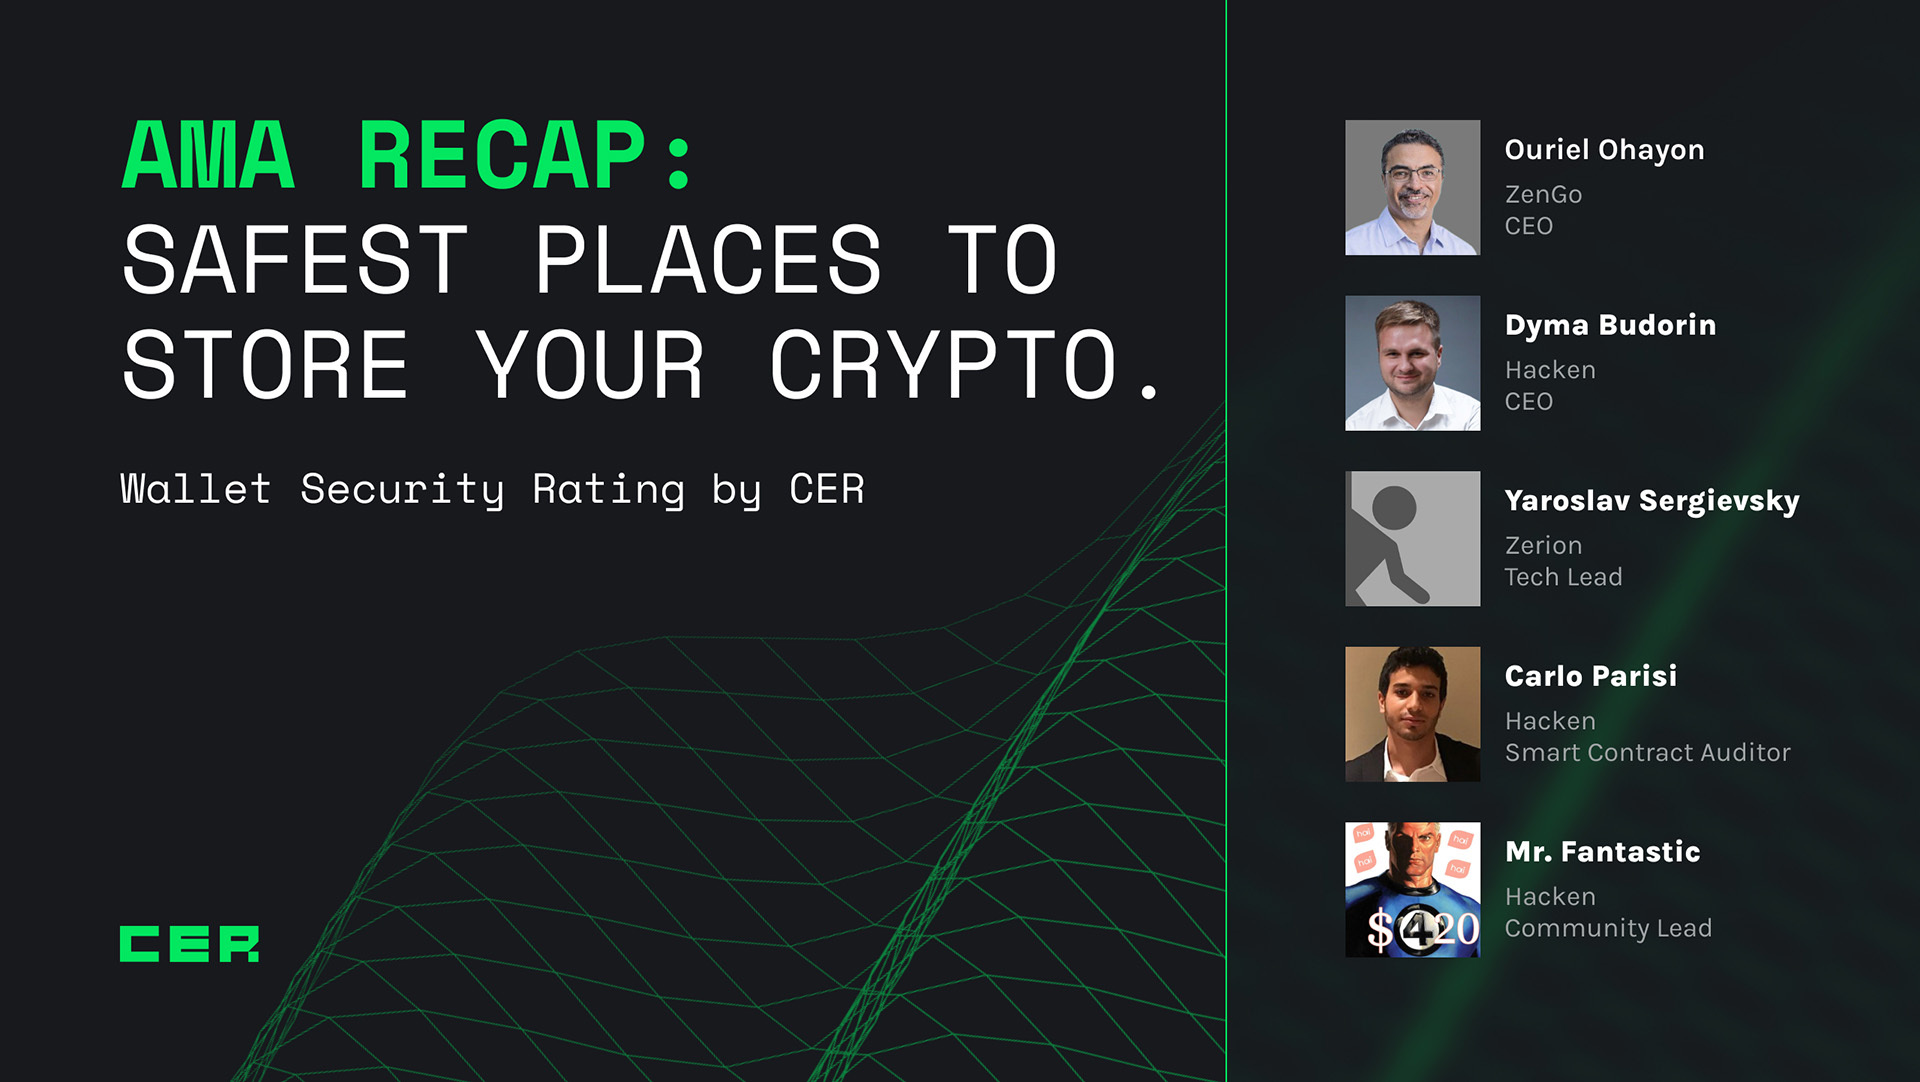 Safest Places to Store Your Crypto. Wallet Security Rating by CER (AMA Recap from June 12)image